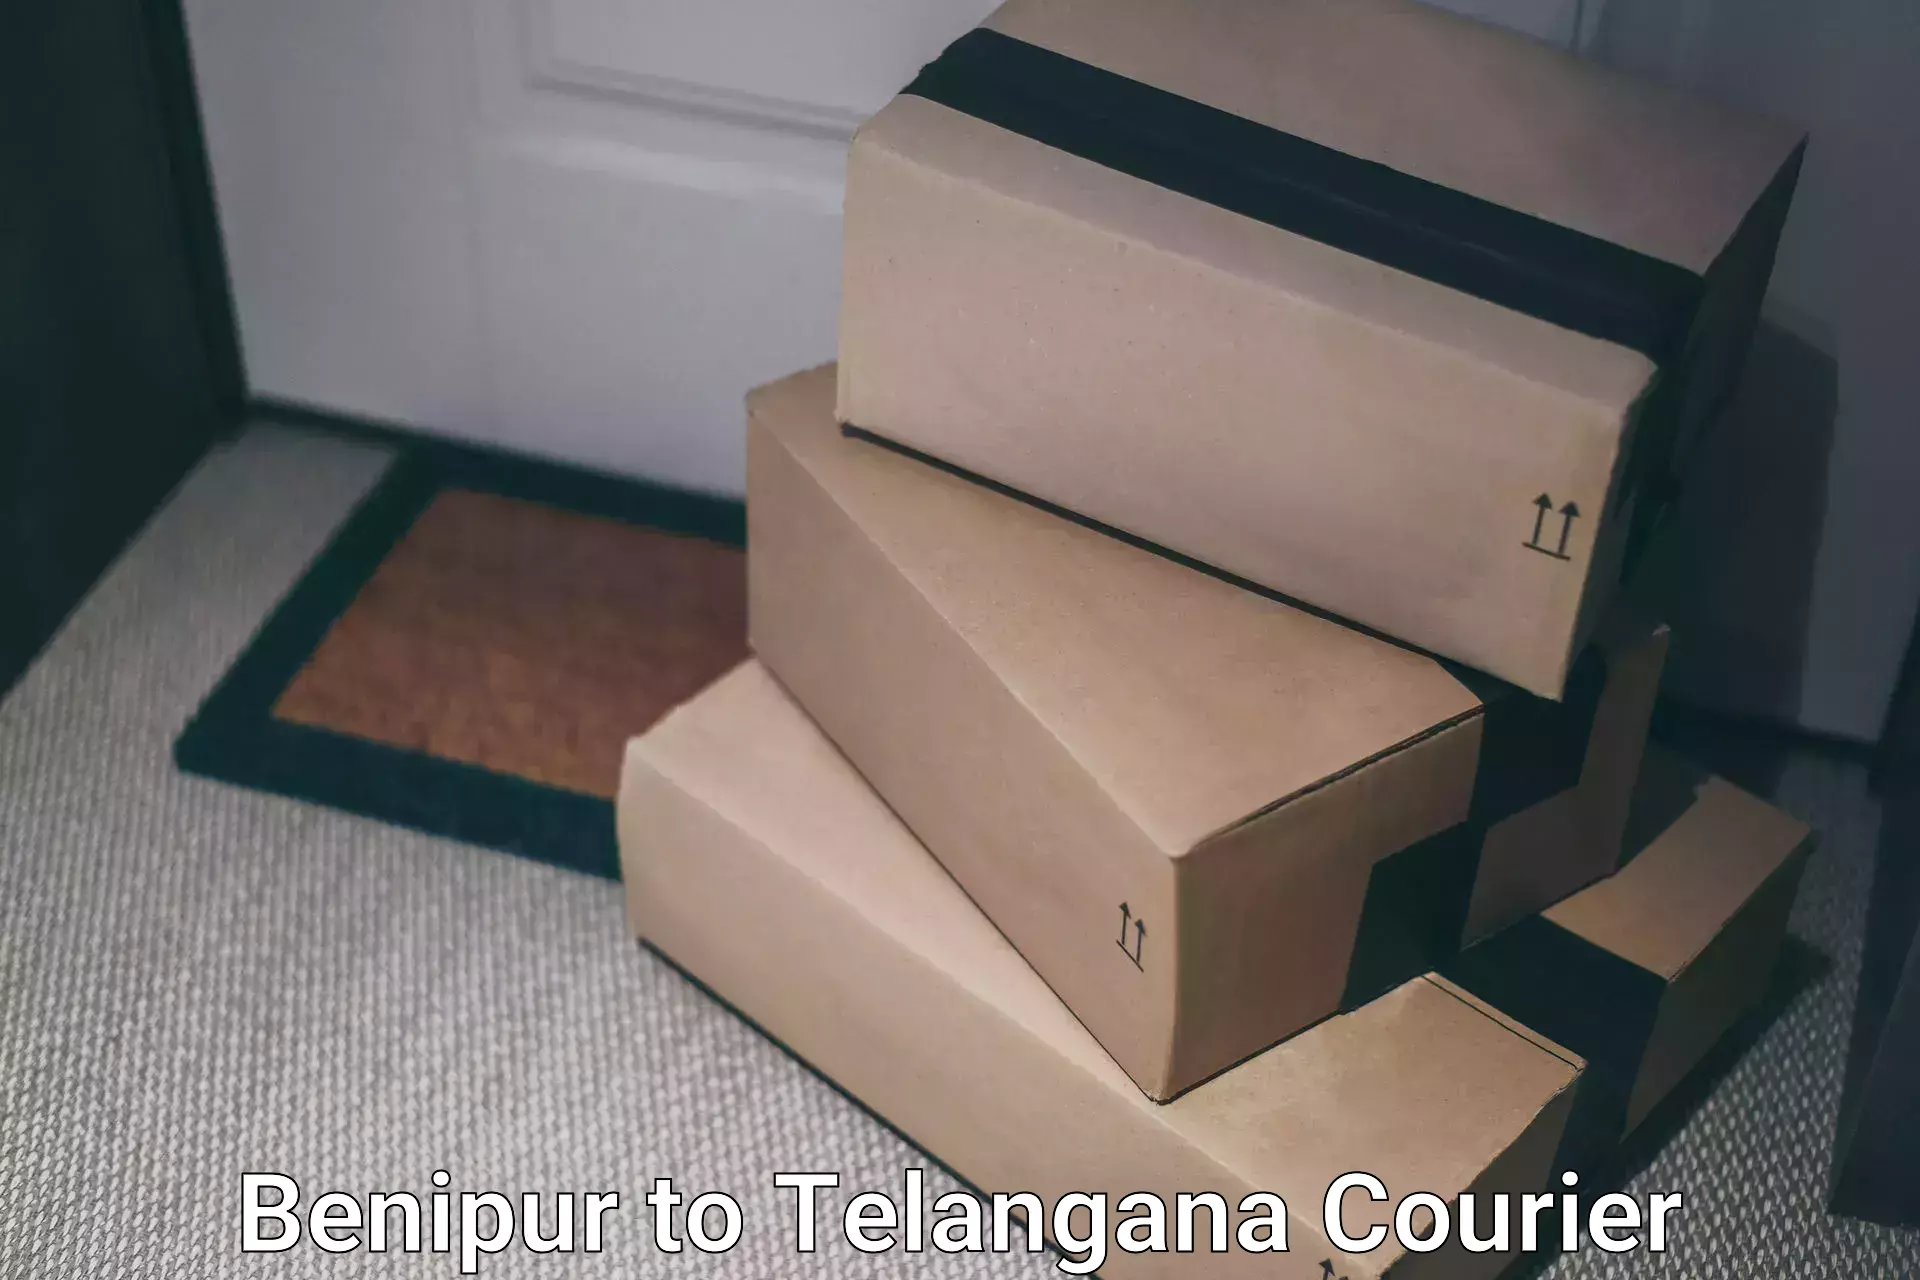 Cross-border shipping Benipur to Sultanabad